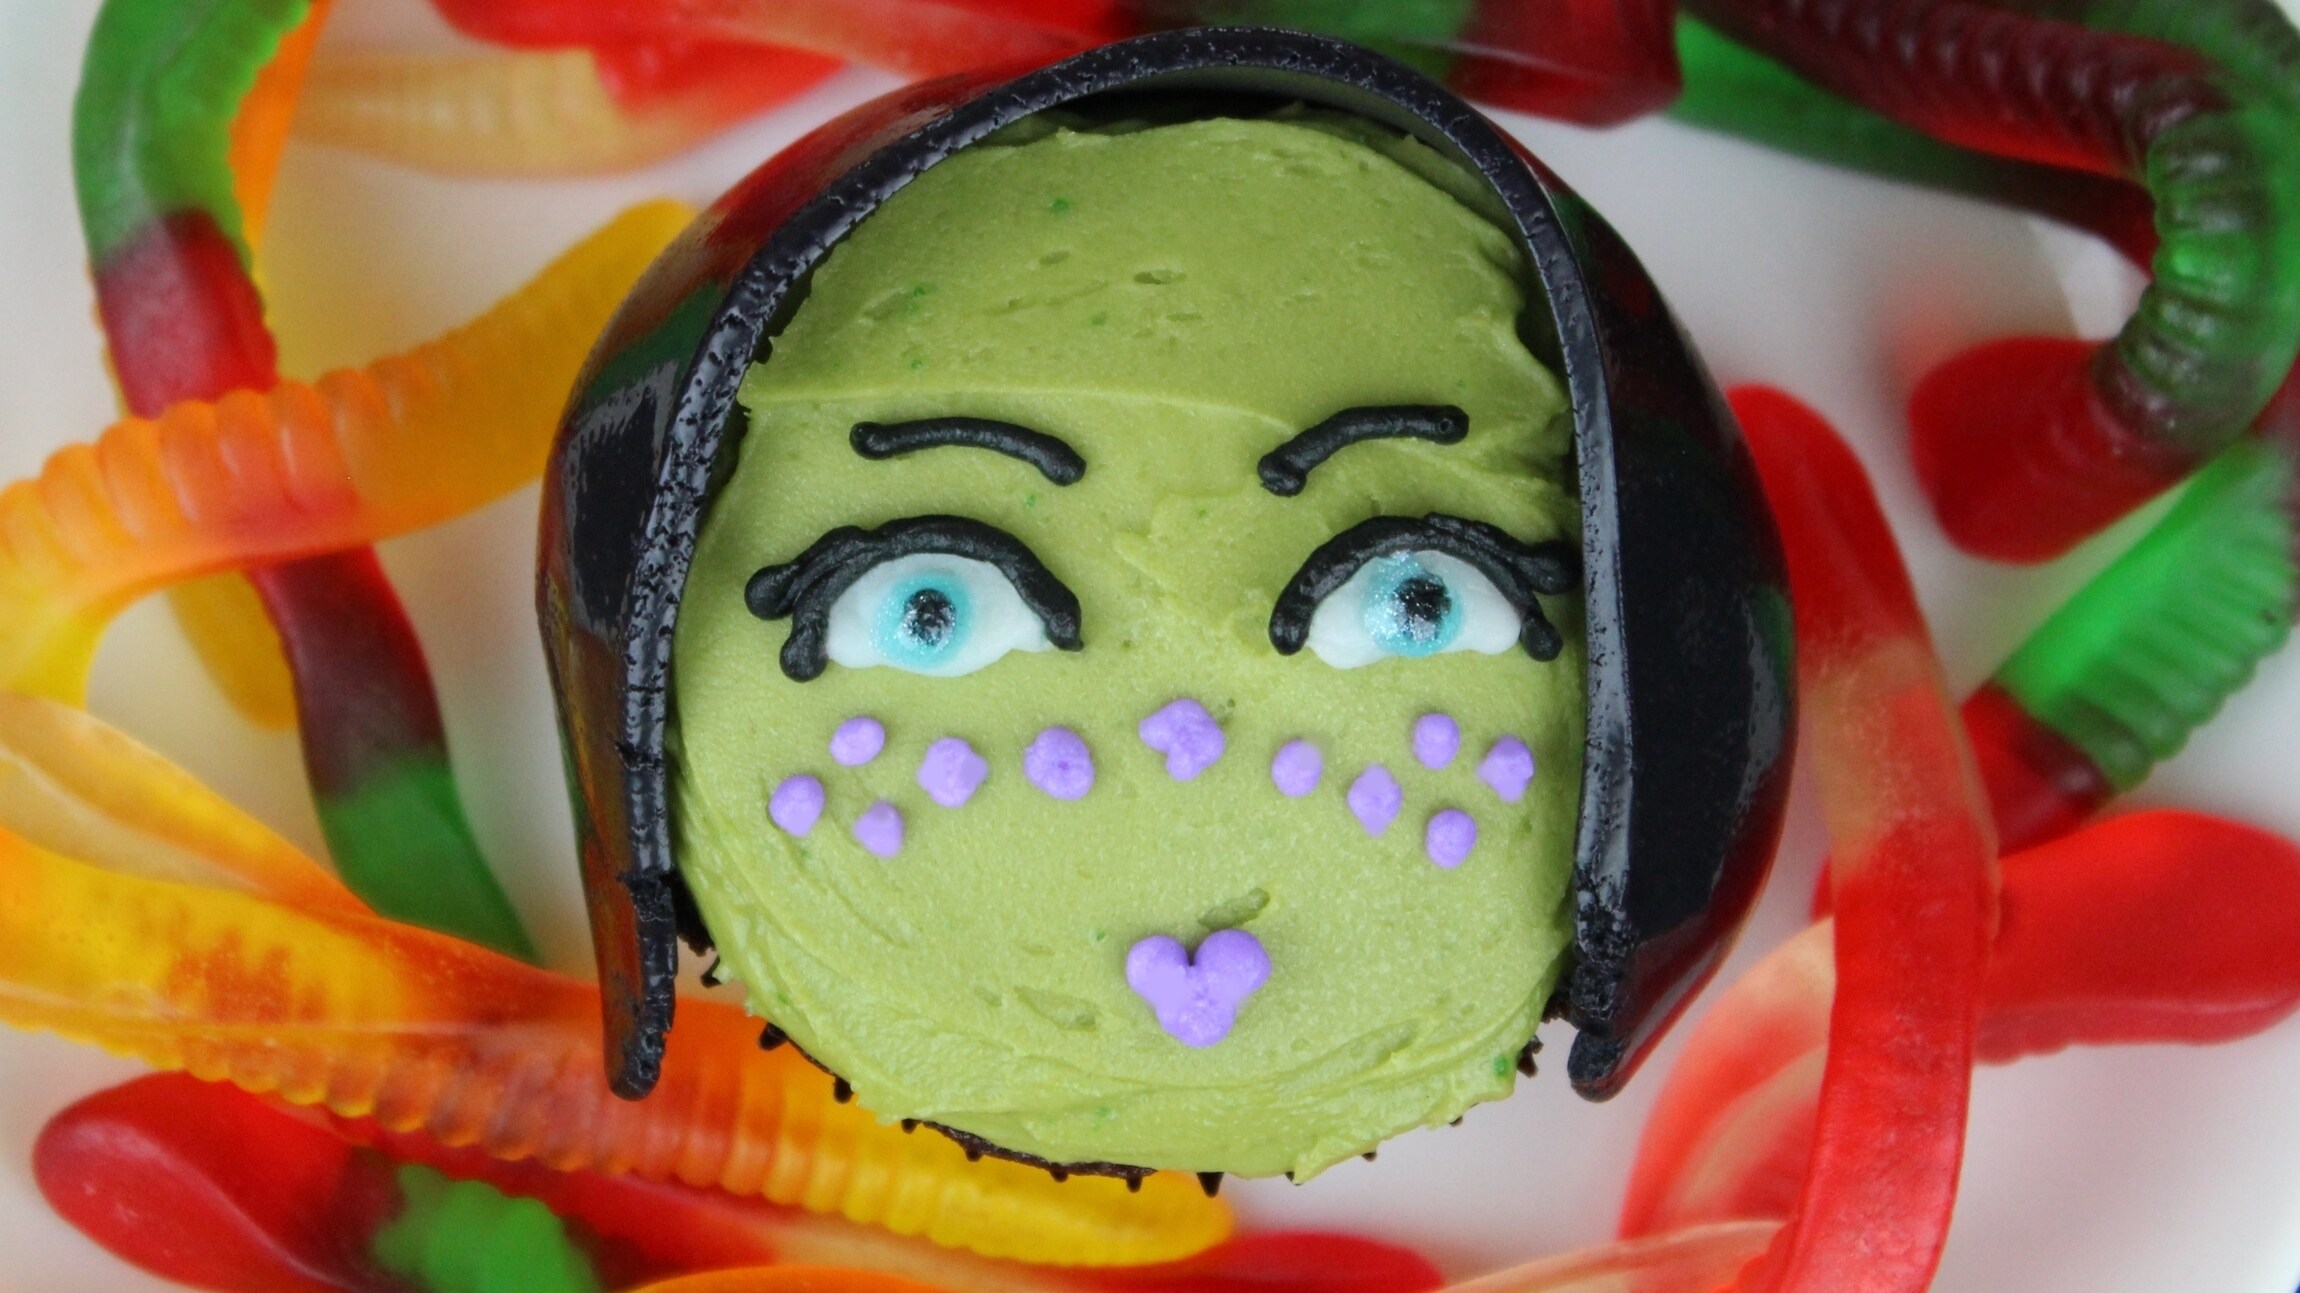 Barriss Offee Cupcakes (With Hidden Brain Worms!)